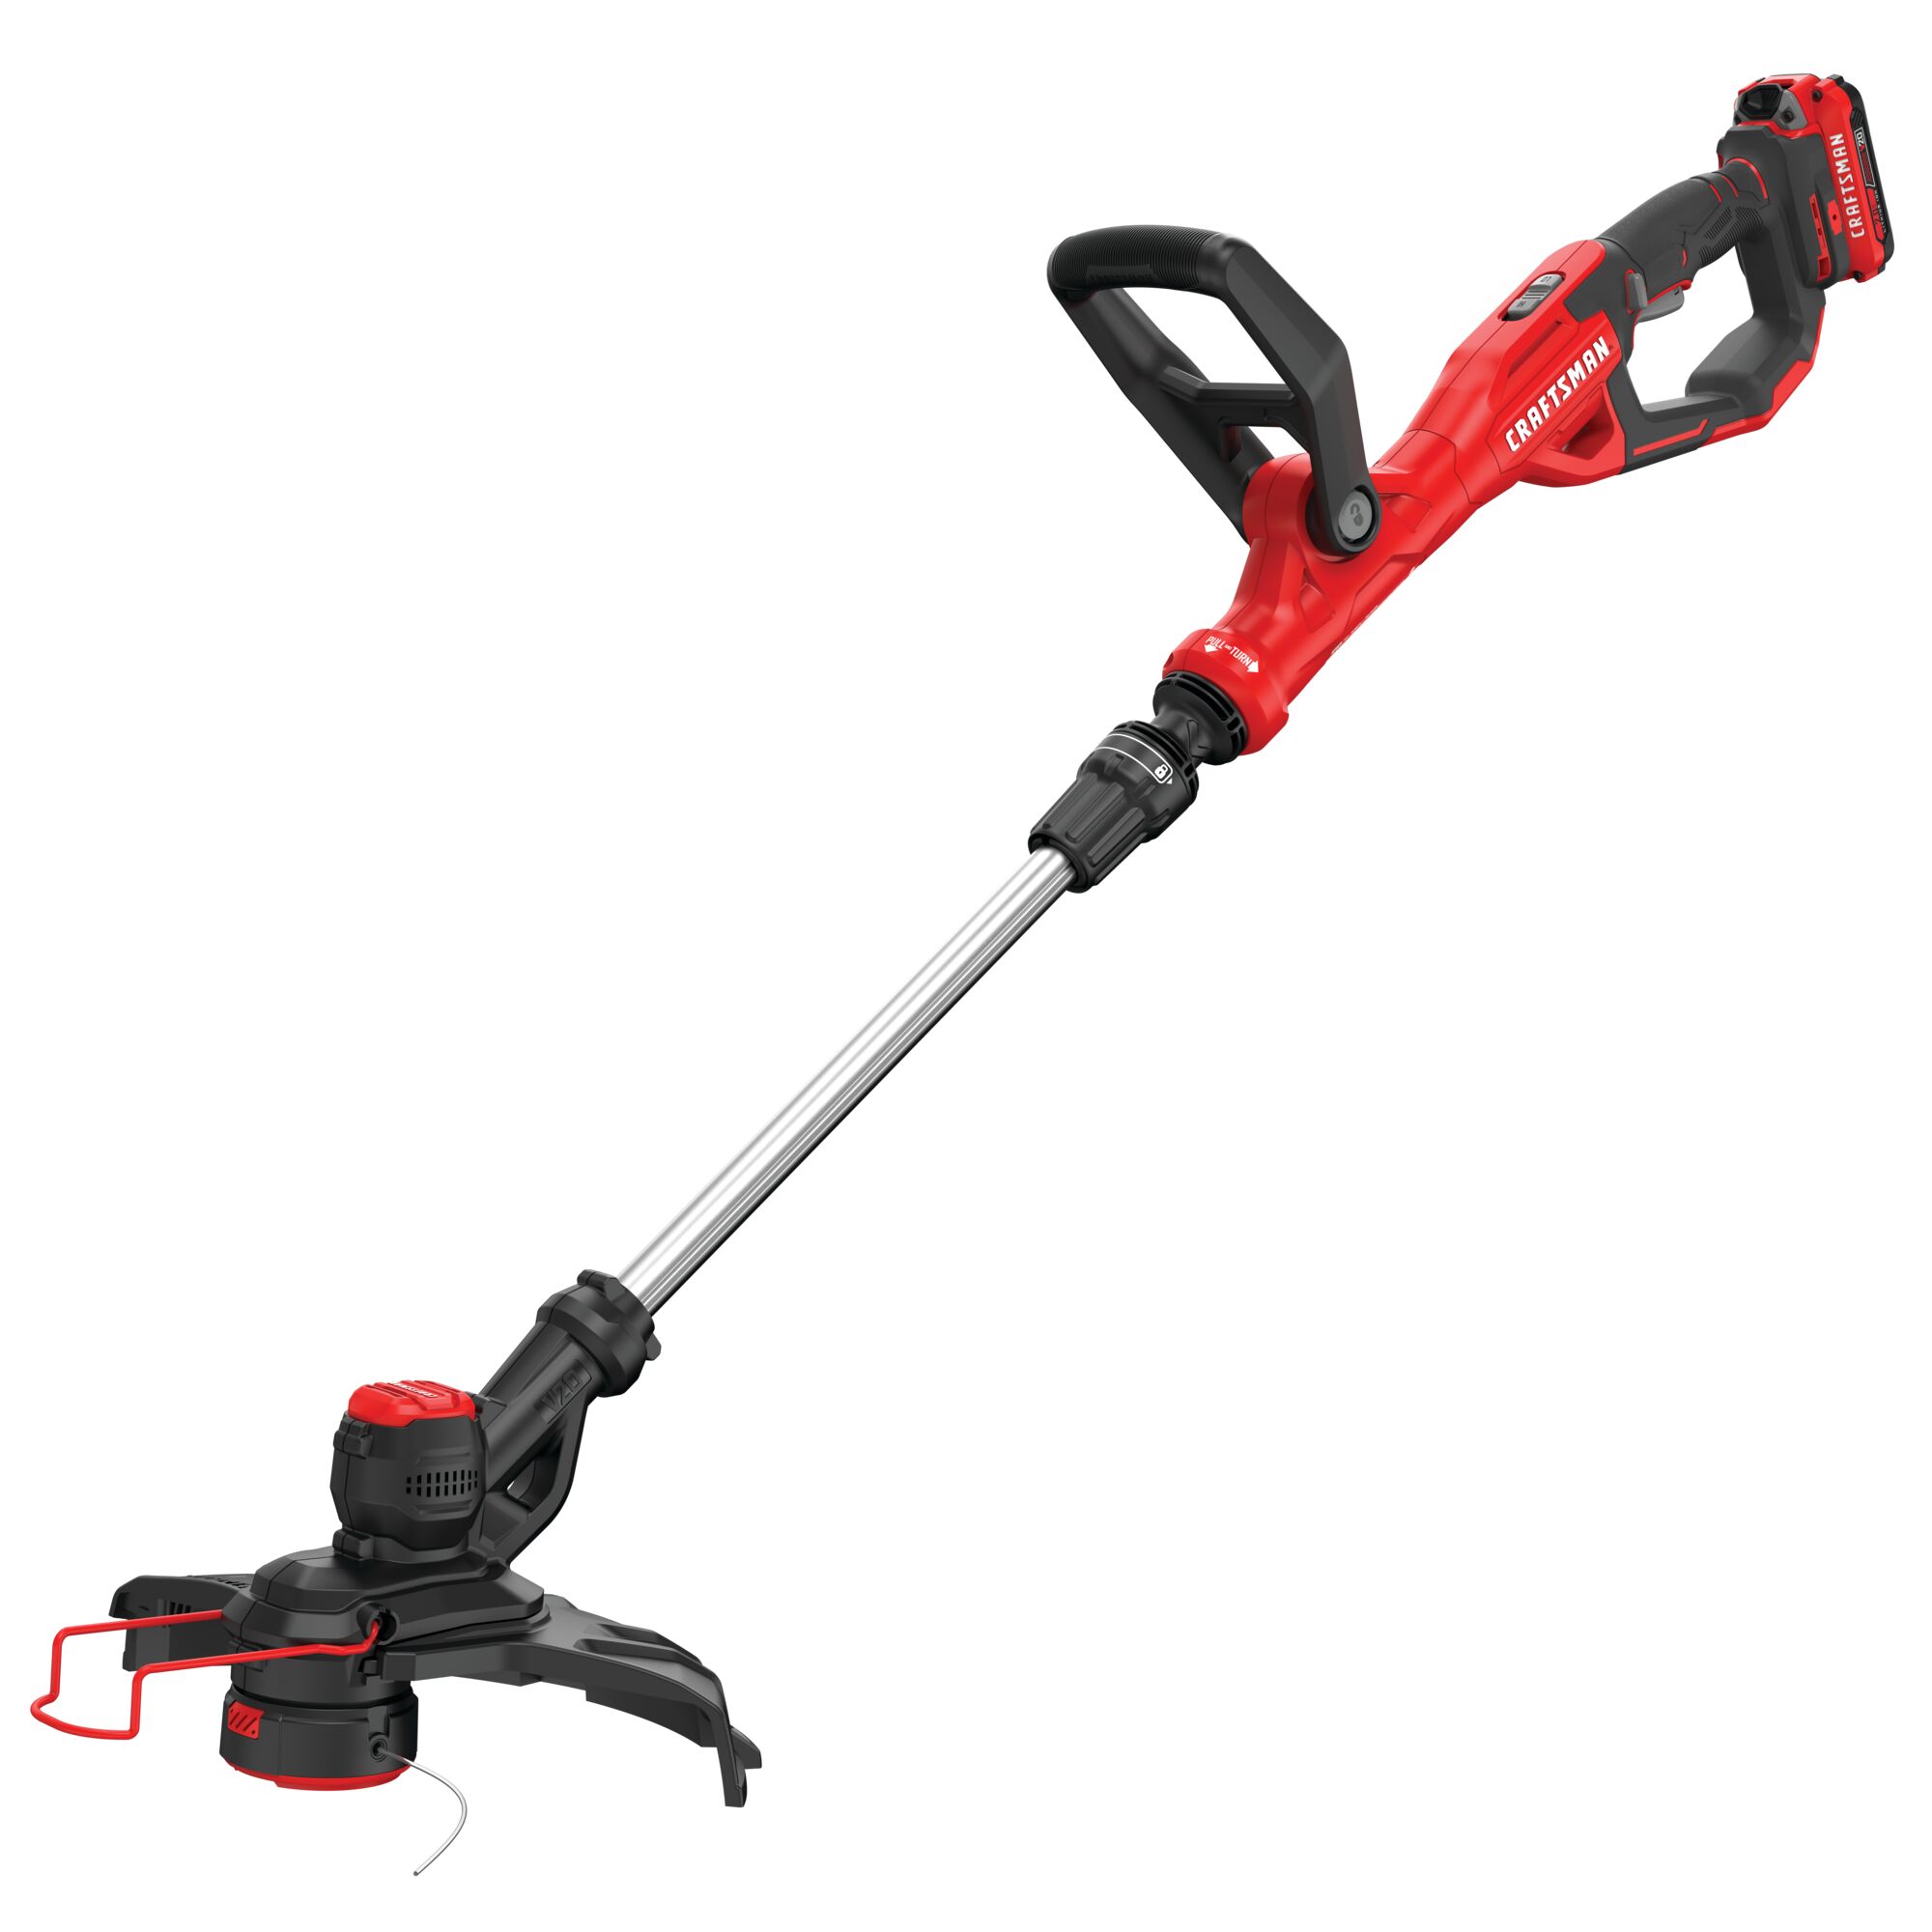 Left profile of 20 volt weedwacker 13 inch cordless string trimmer and edger with automatic feed kit.